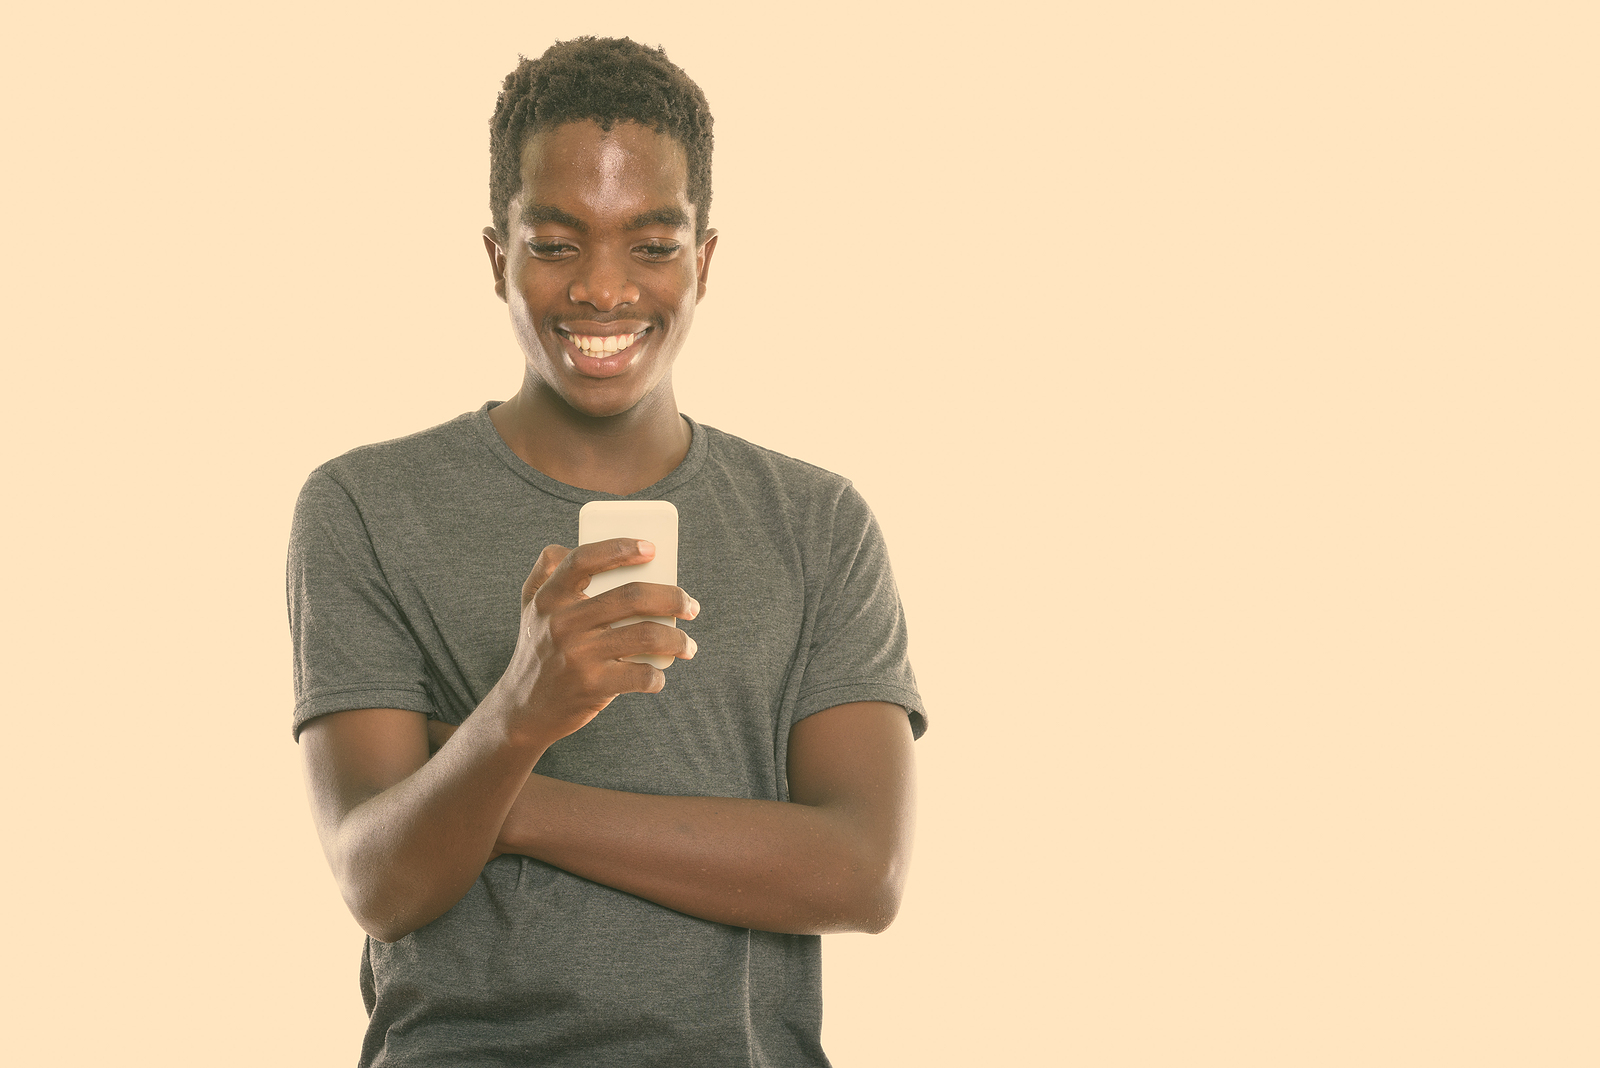 Attractive young black man with a t shirt smiling looking at his phone against a plain background.